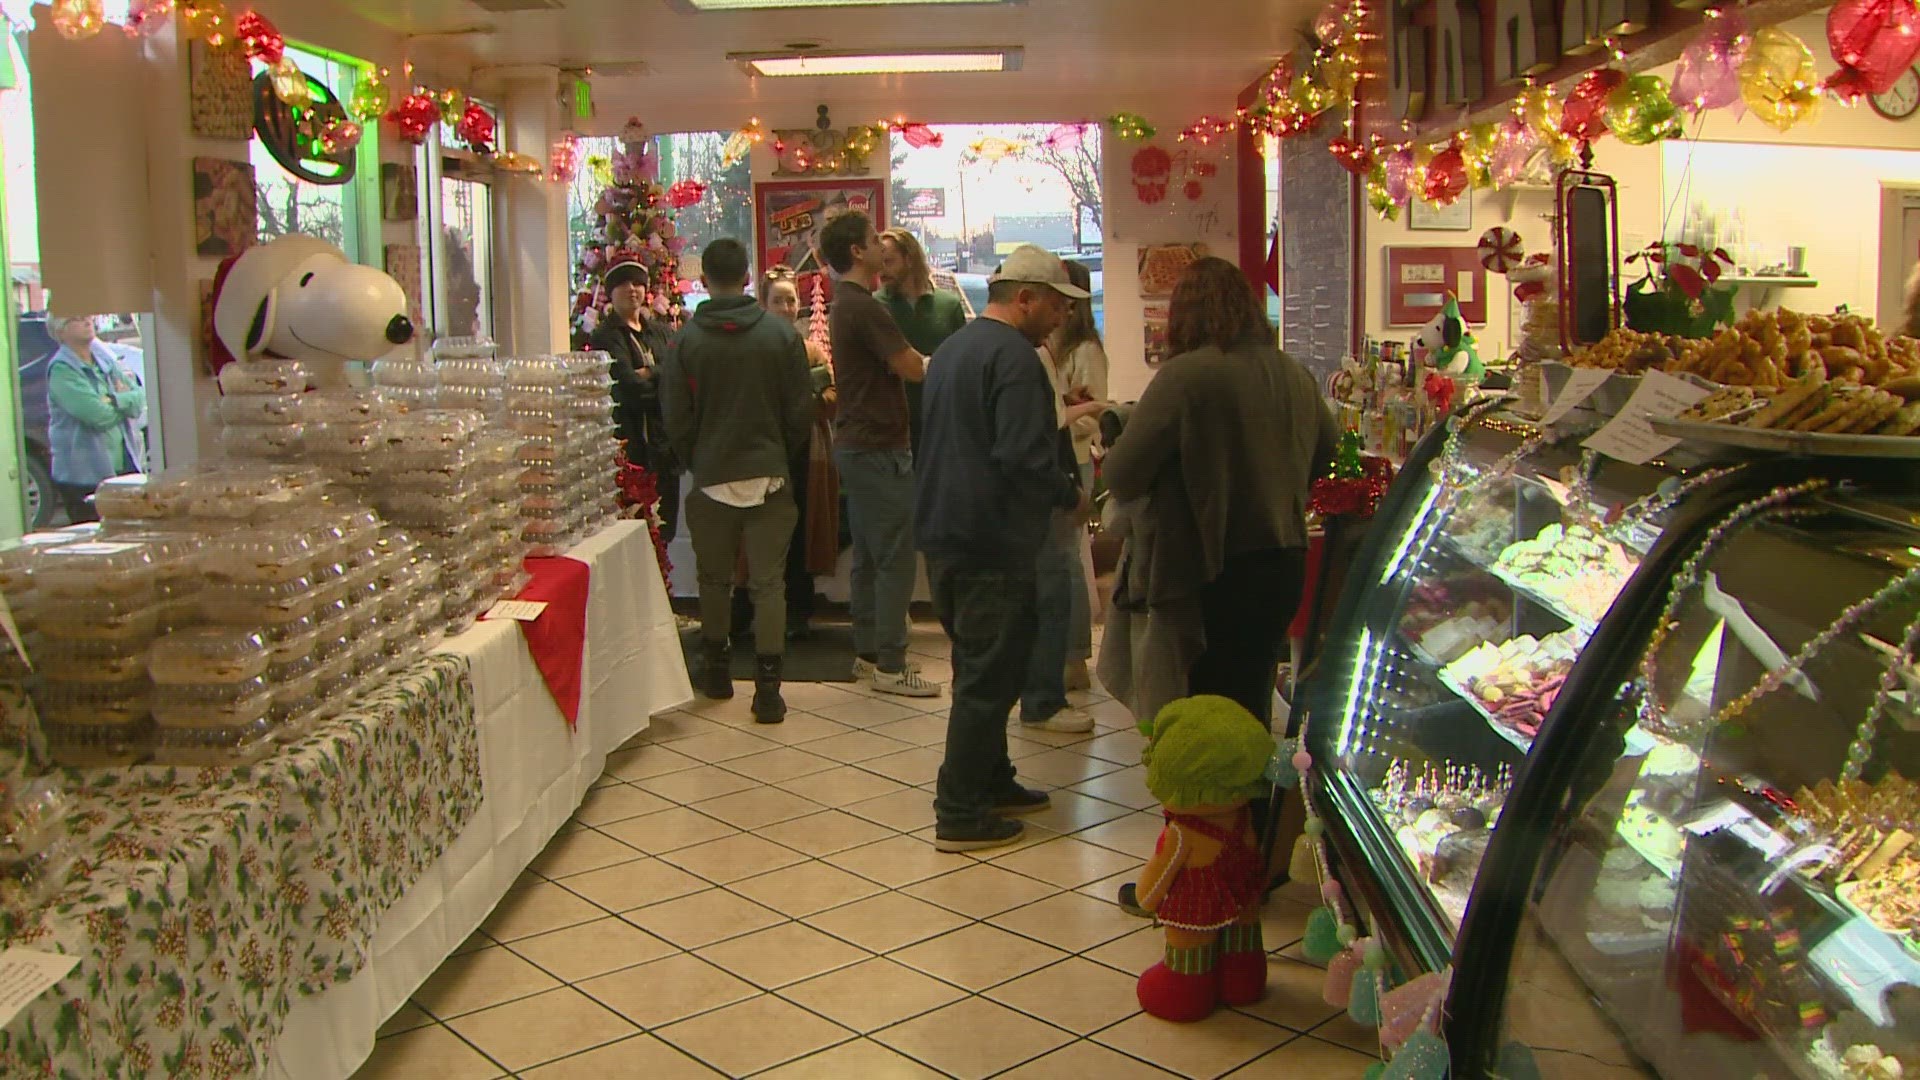 Grammy's Goodies helped make sure migrant students in Colorado have a sweet Christmas.